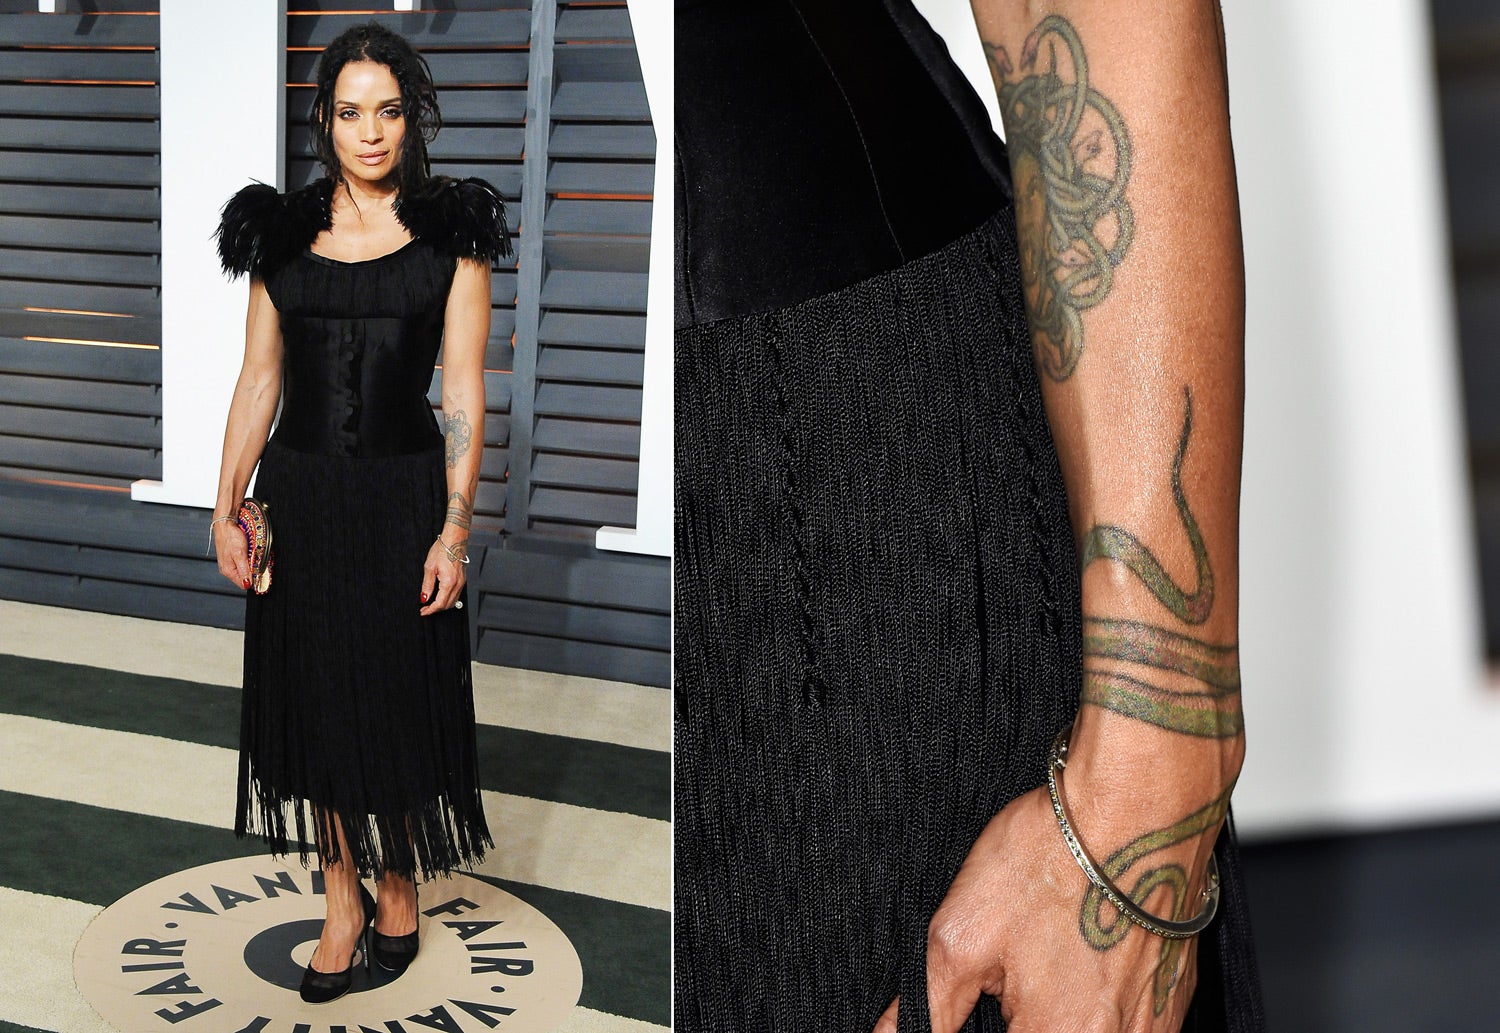 Celebrities with Tattoos: See Who’s Inked Up